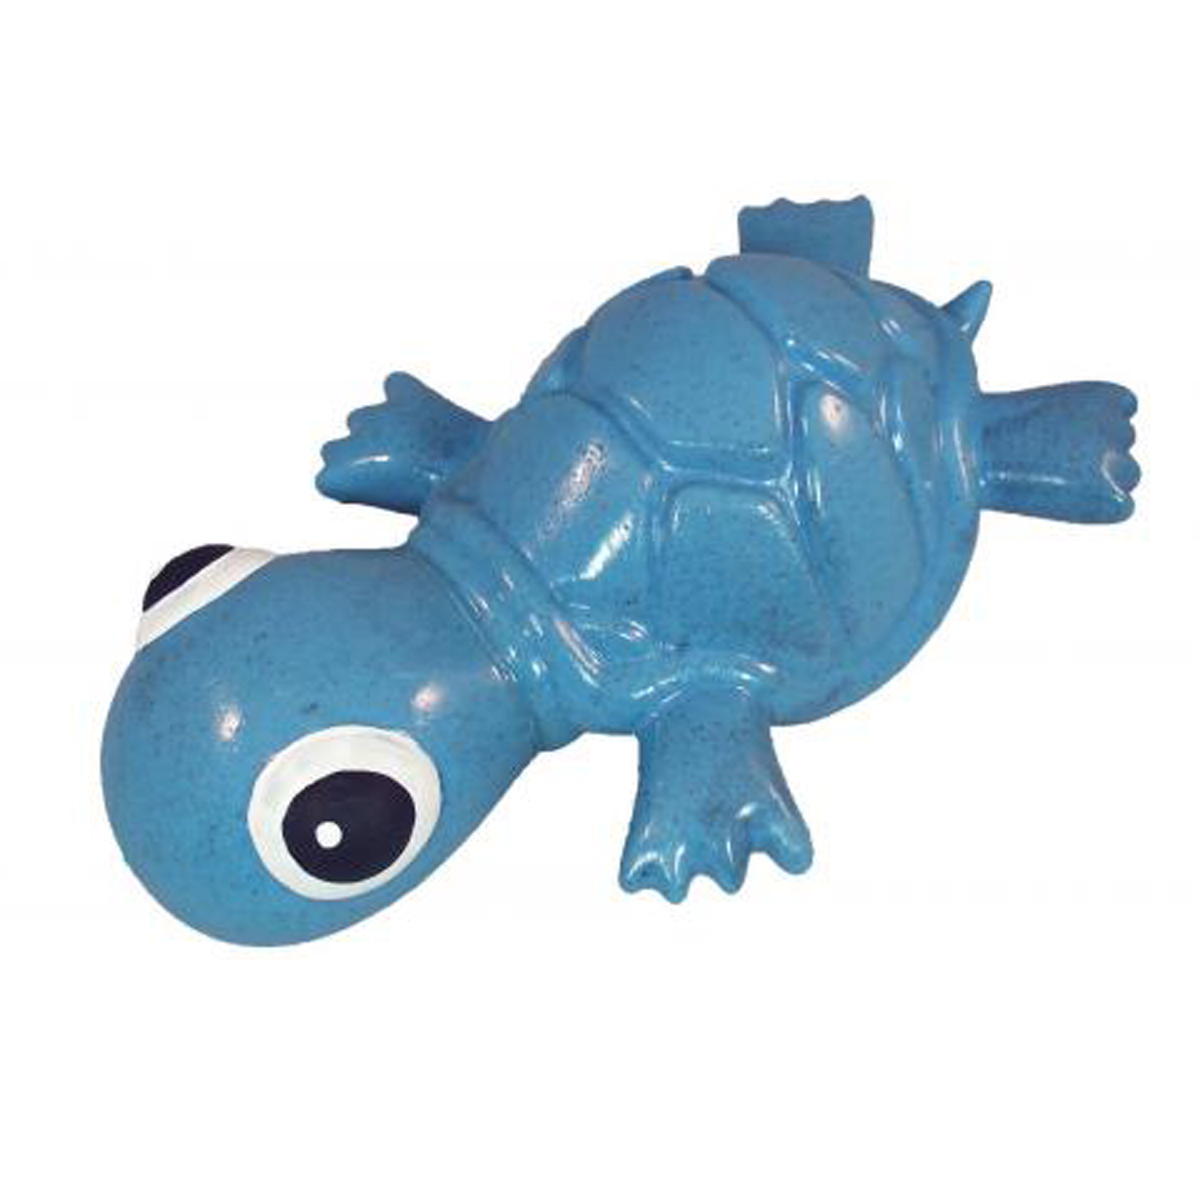 Cycle Dog 3-Play Turtle Dog Toy - Blue